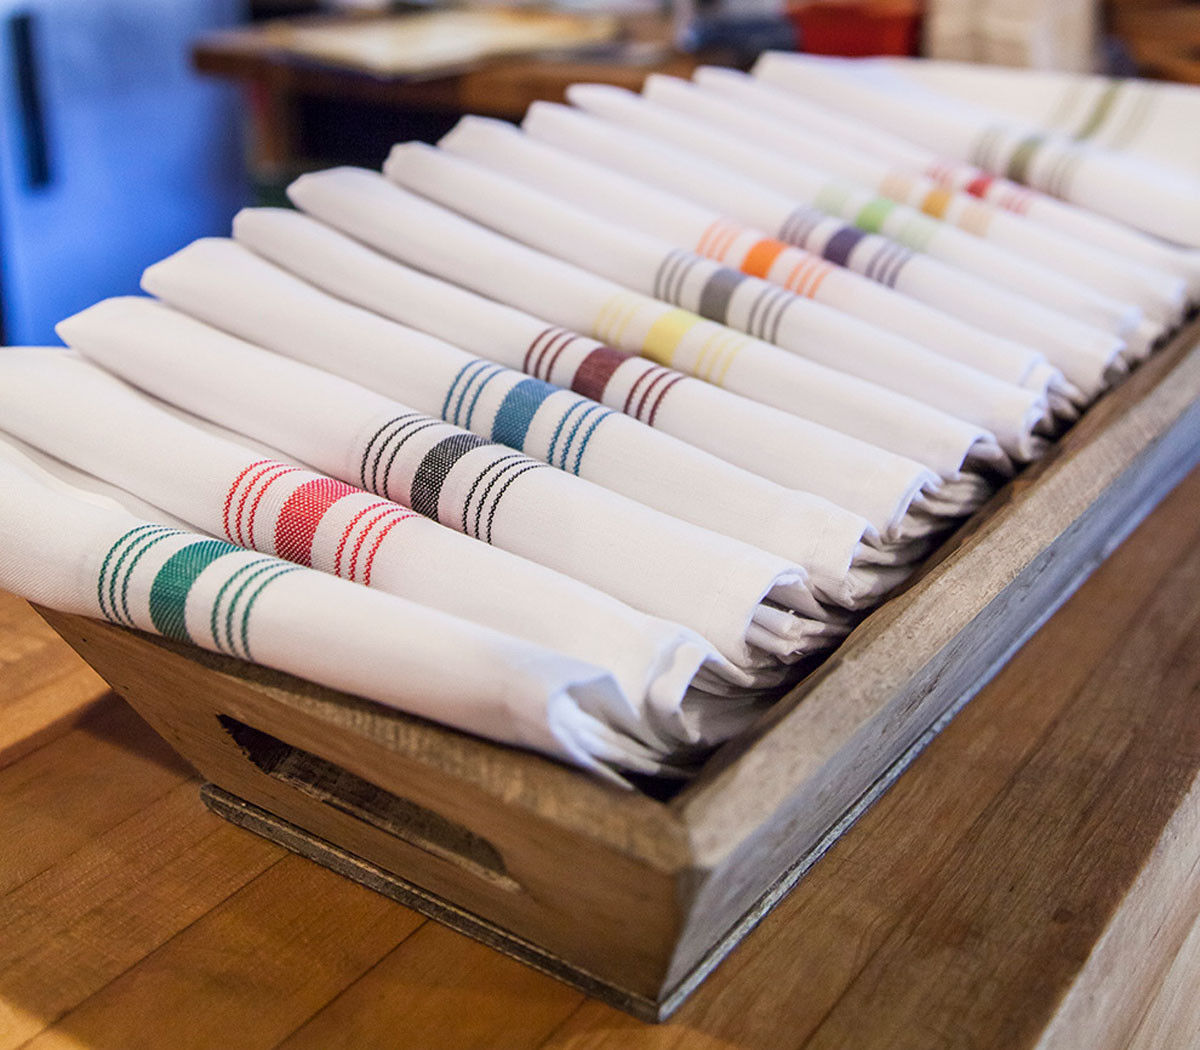 Do the Milliken Signature Stripe bistro napkins come in a variety of colors?